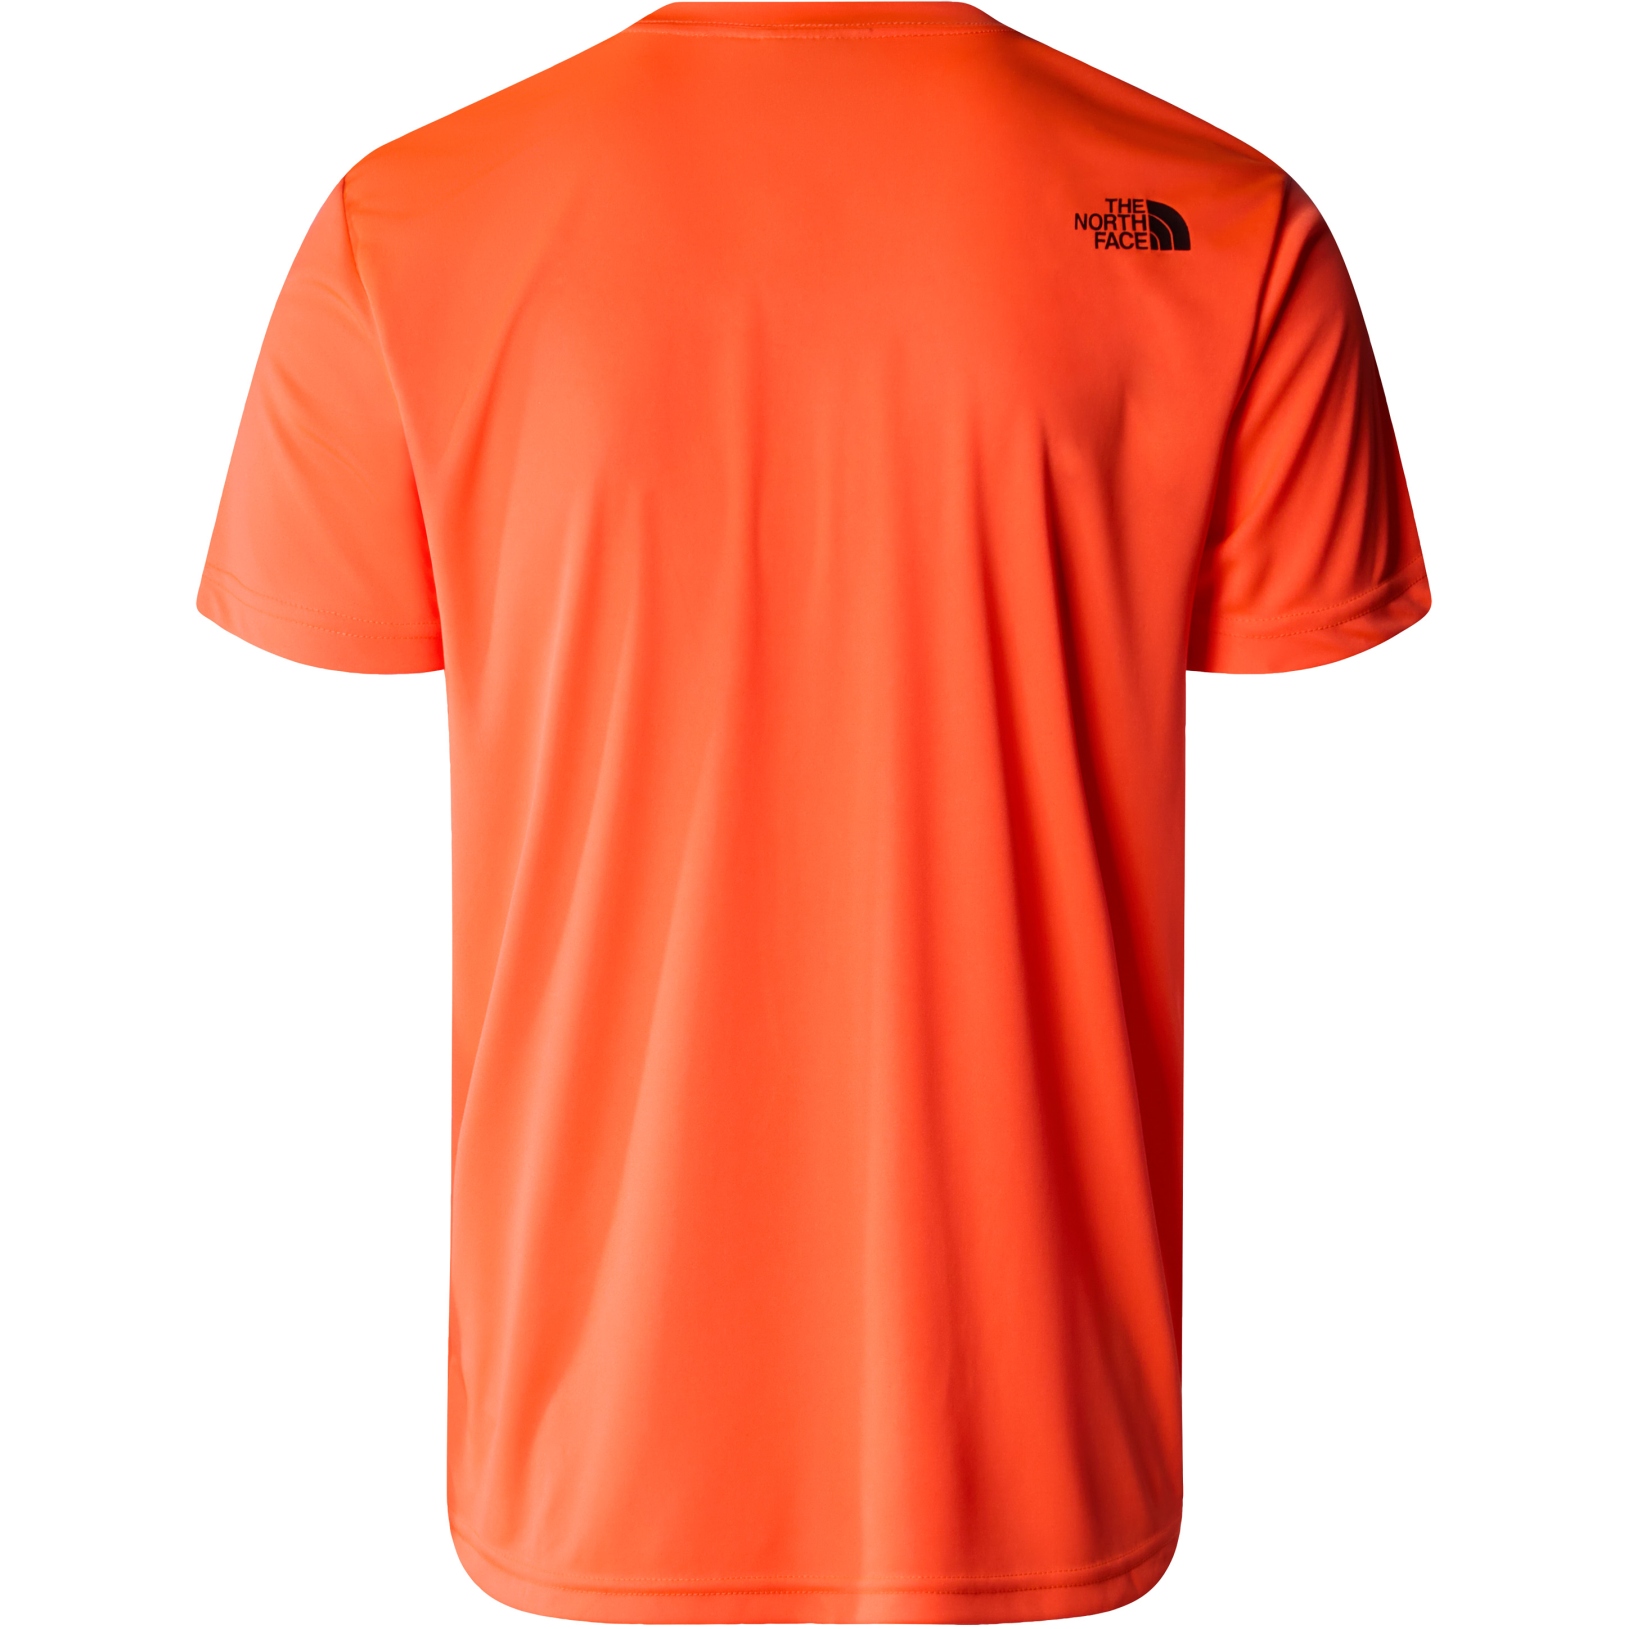 The North Face Reaxion Easy T-Shirt Men - Vivid Flame